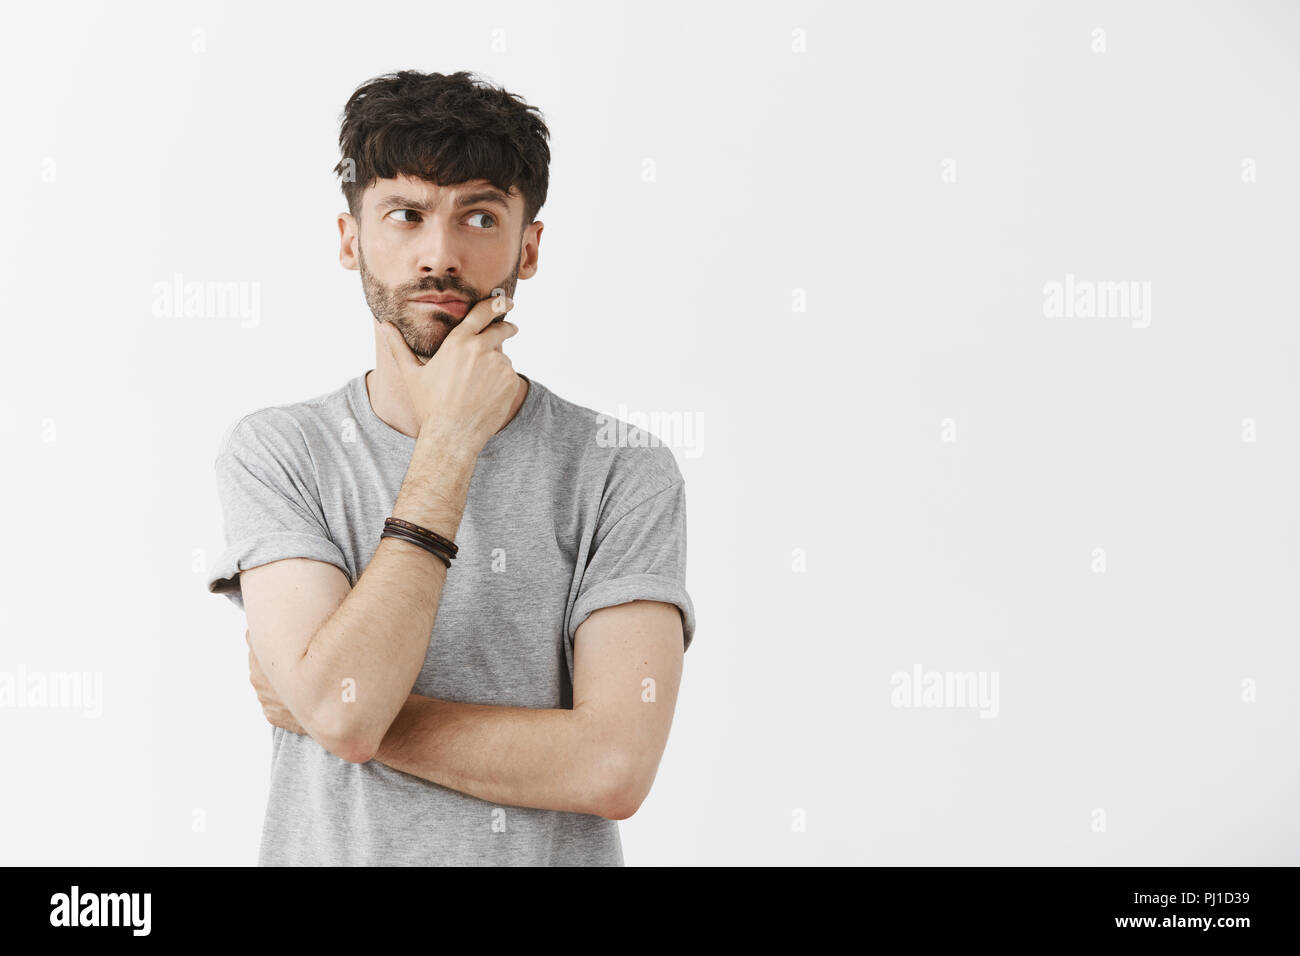 Waist-up shot of creative and artistic caucasian male model with beard holding hand on jaw and chin gazing right with spaced out expression thinking making plan over gray background Stock Photo